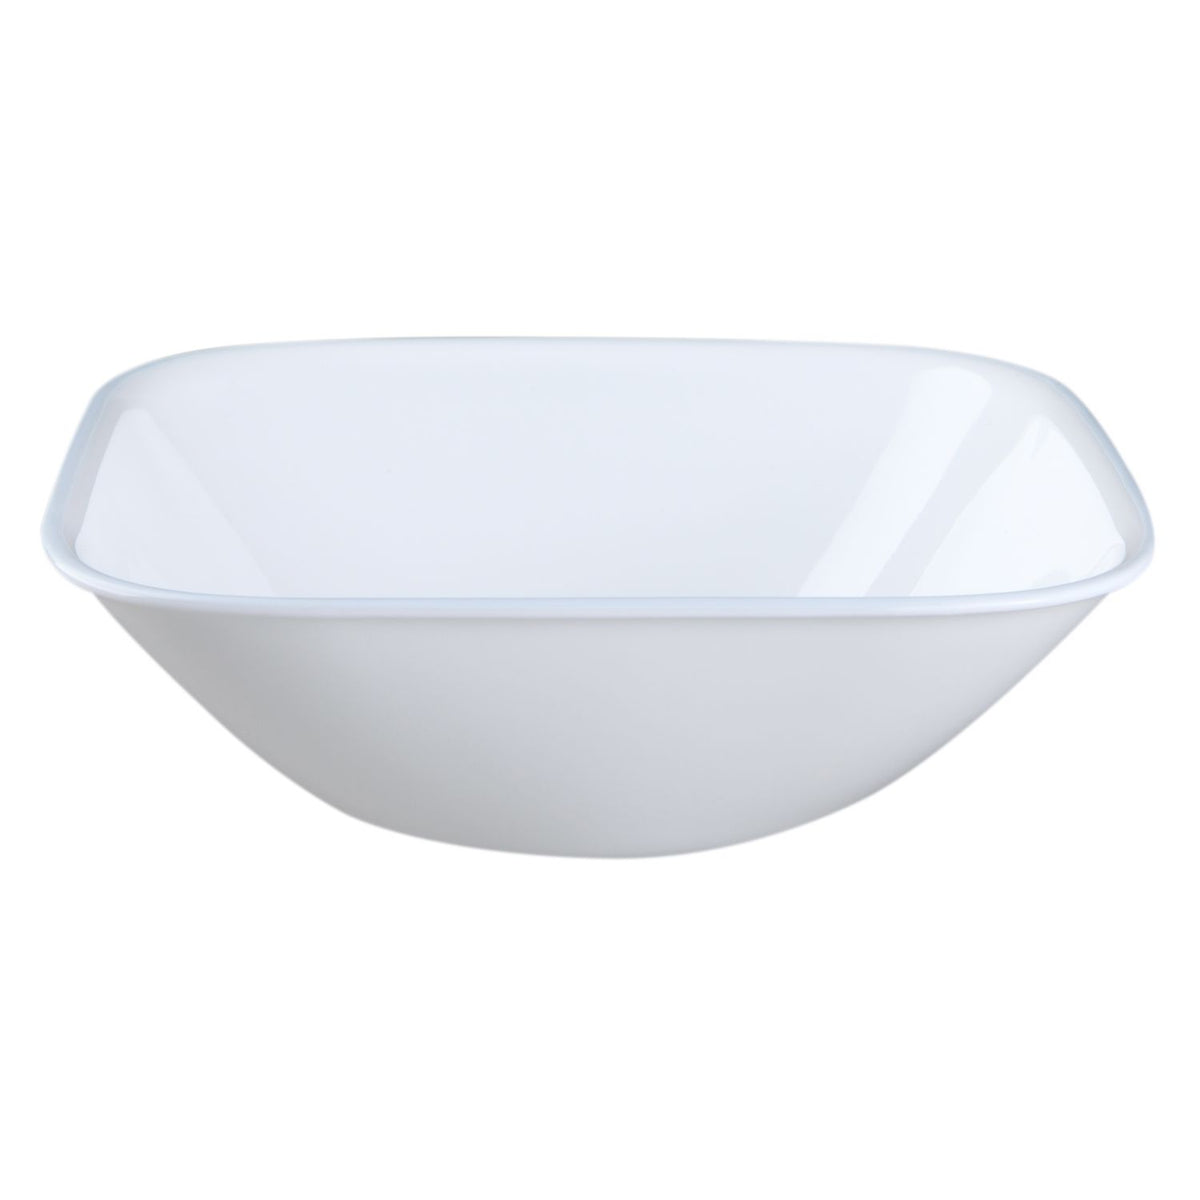 buy dinnerware sets at cheap rate in bulk. wholesale & retail kitchenware supplies store.